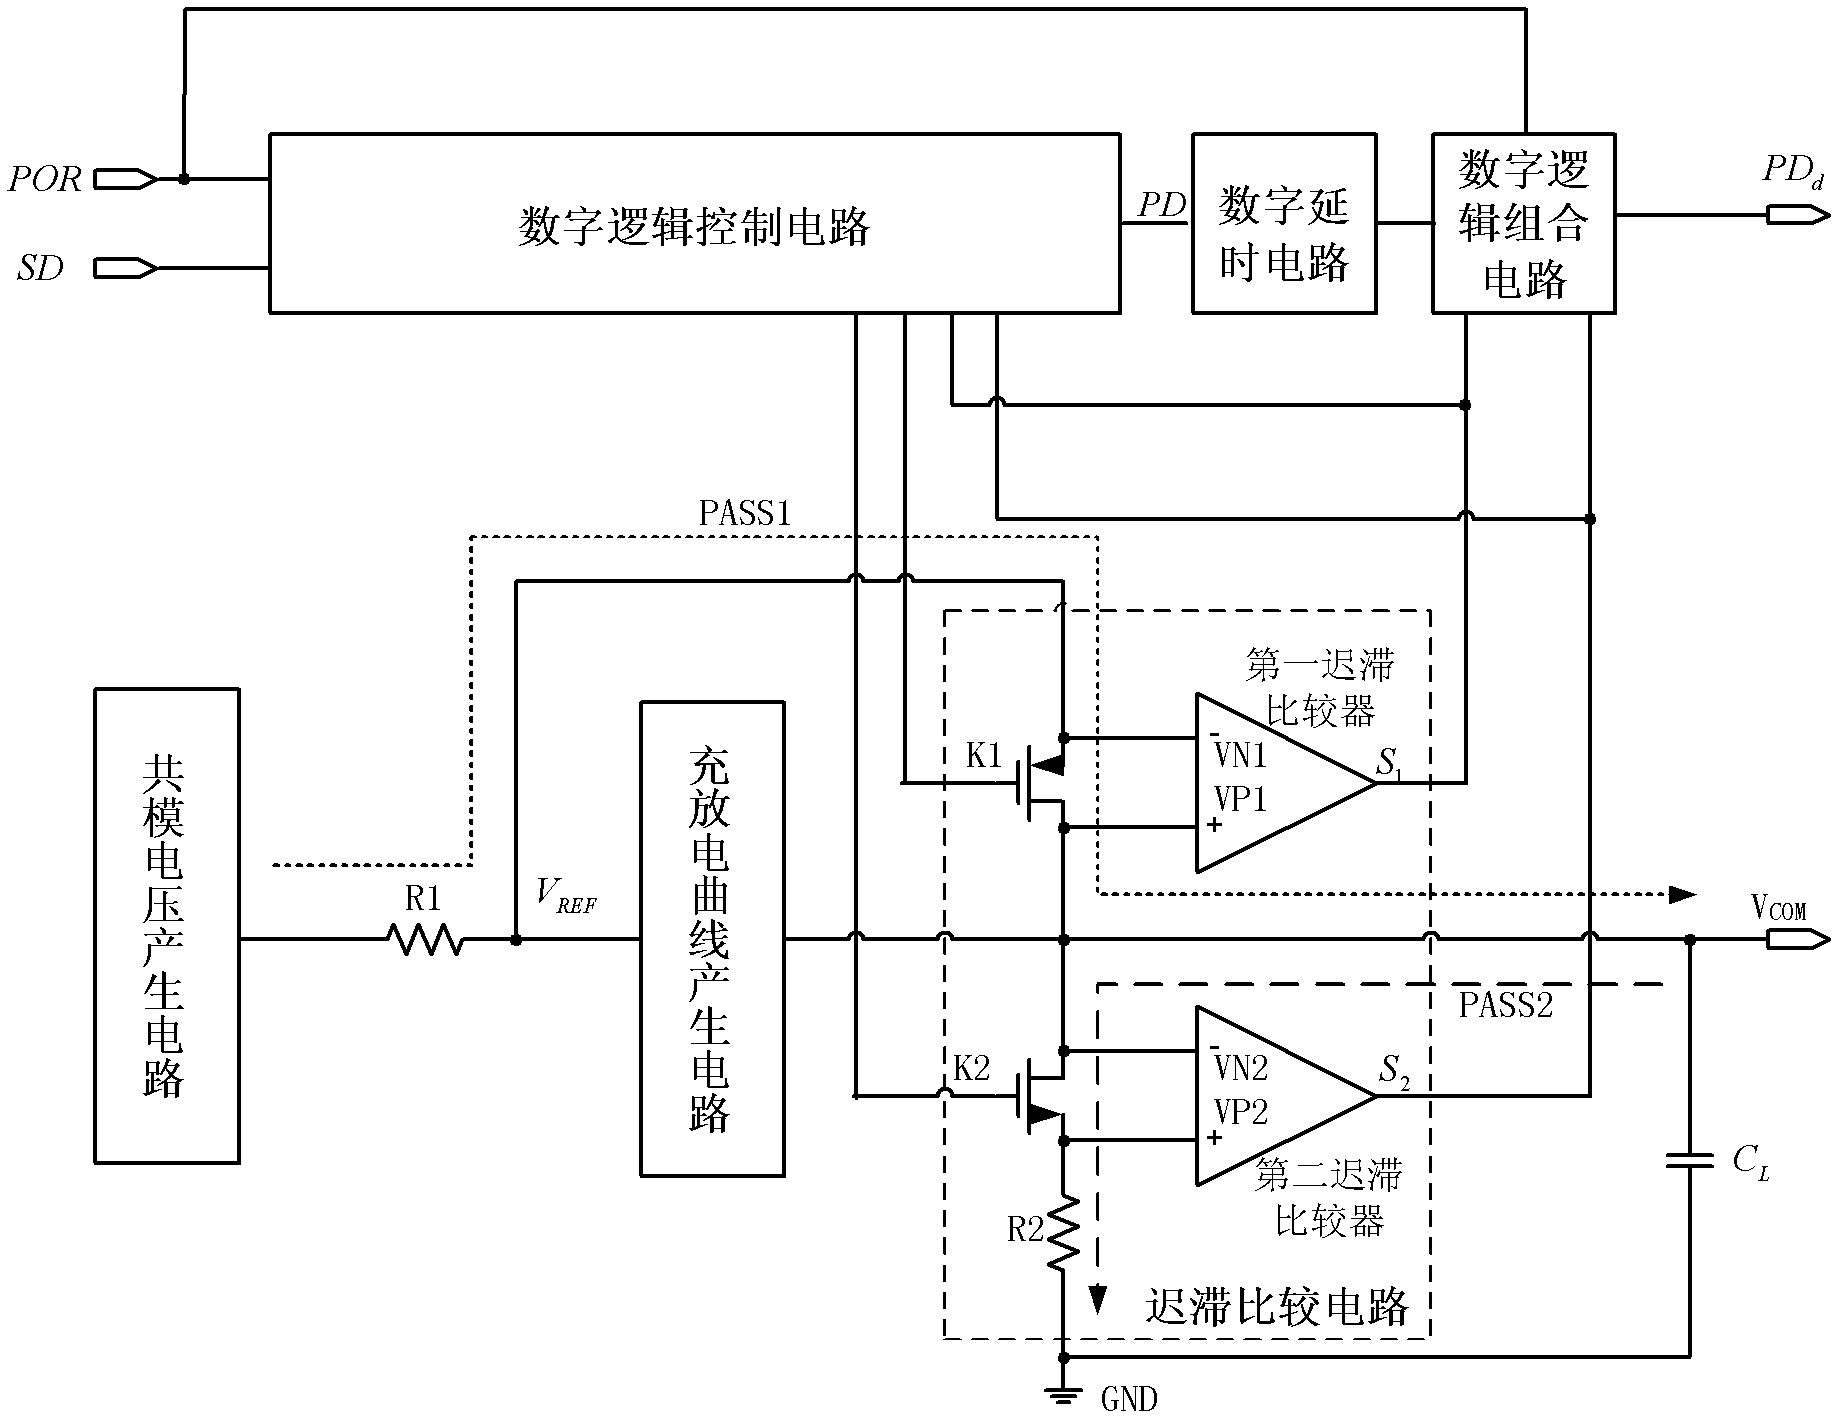 Audio squelch system with hysteresis comparison circuit